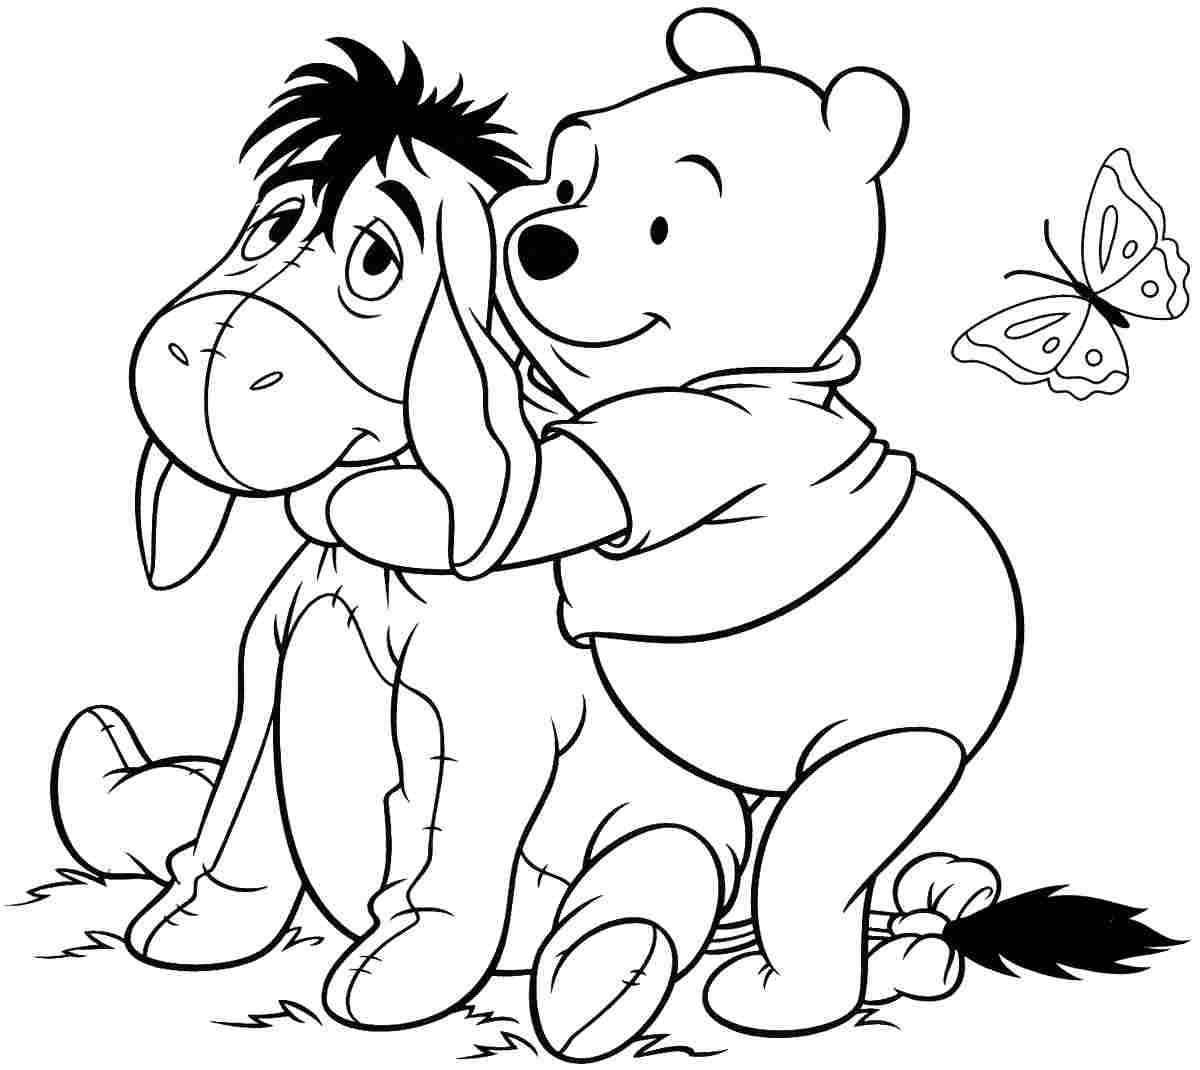 Winnie The Pooh Printable Coloring Pages
 A tale of a honey freak bear Winnie the Pooh 20 Winnie the